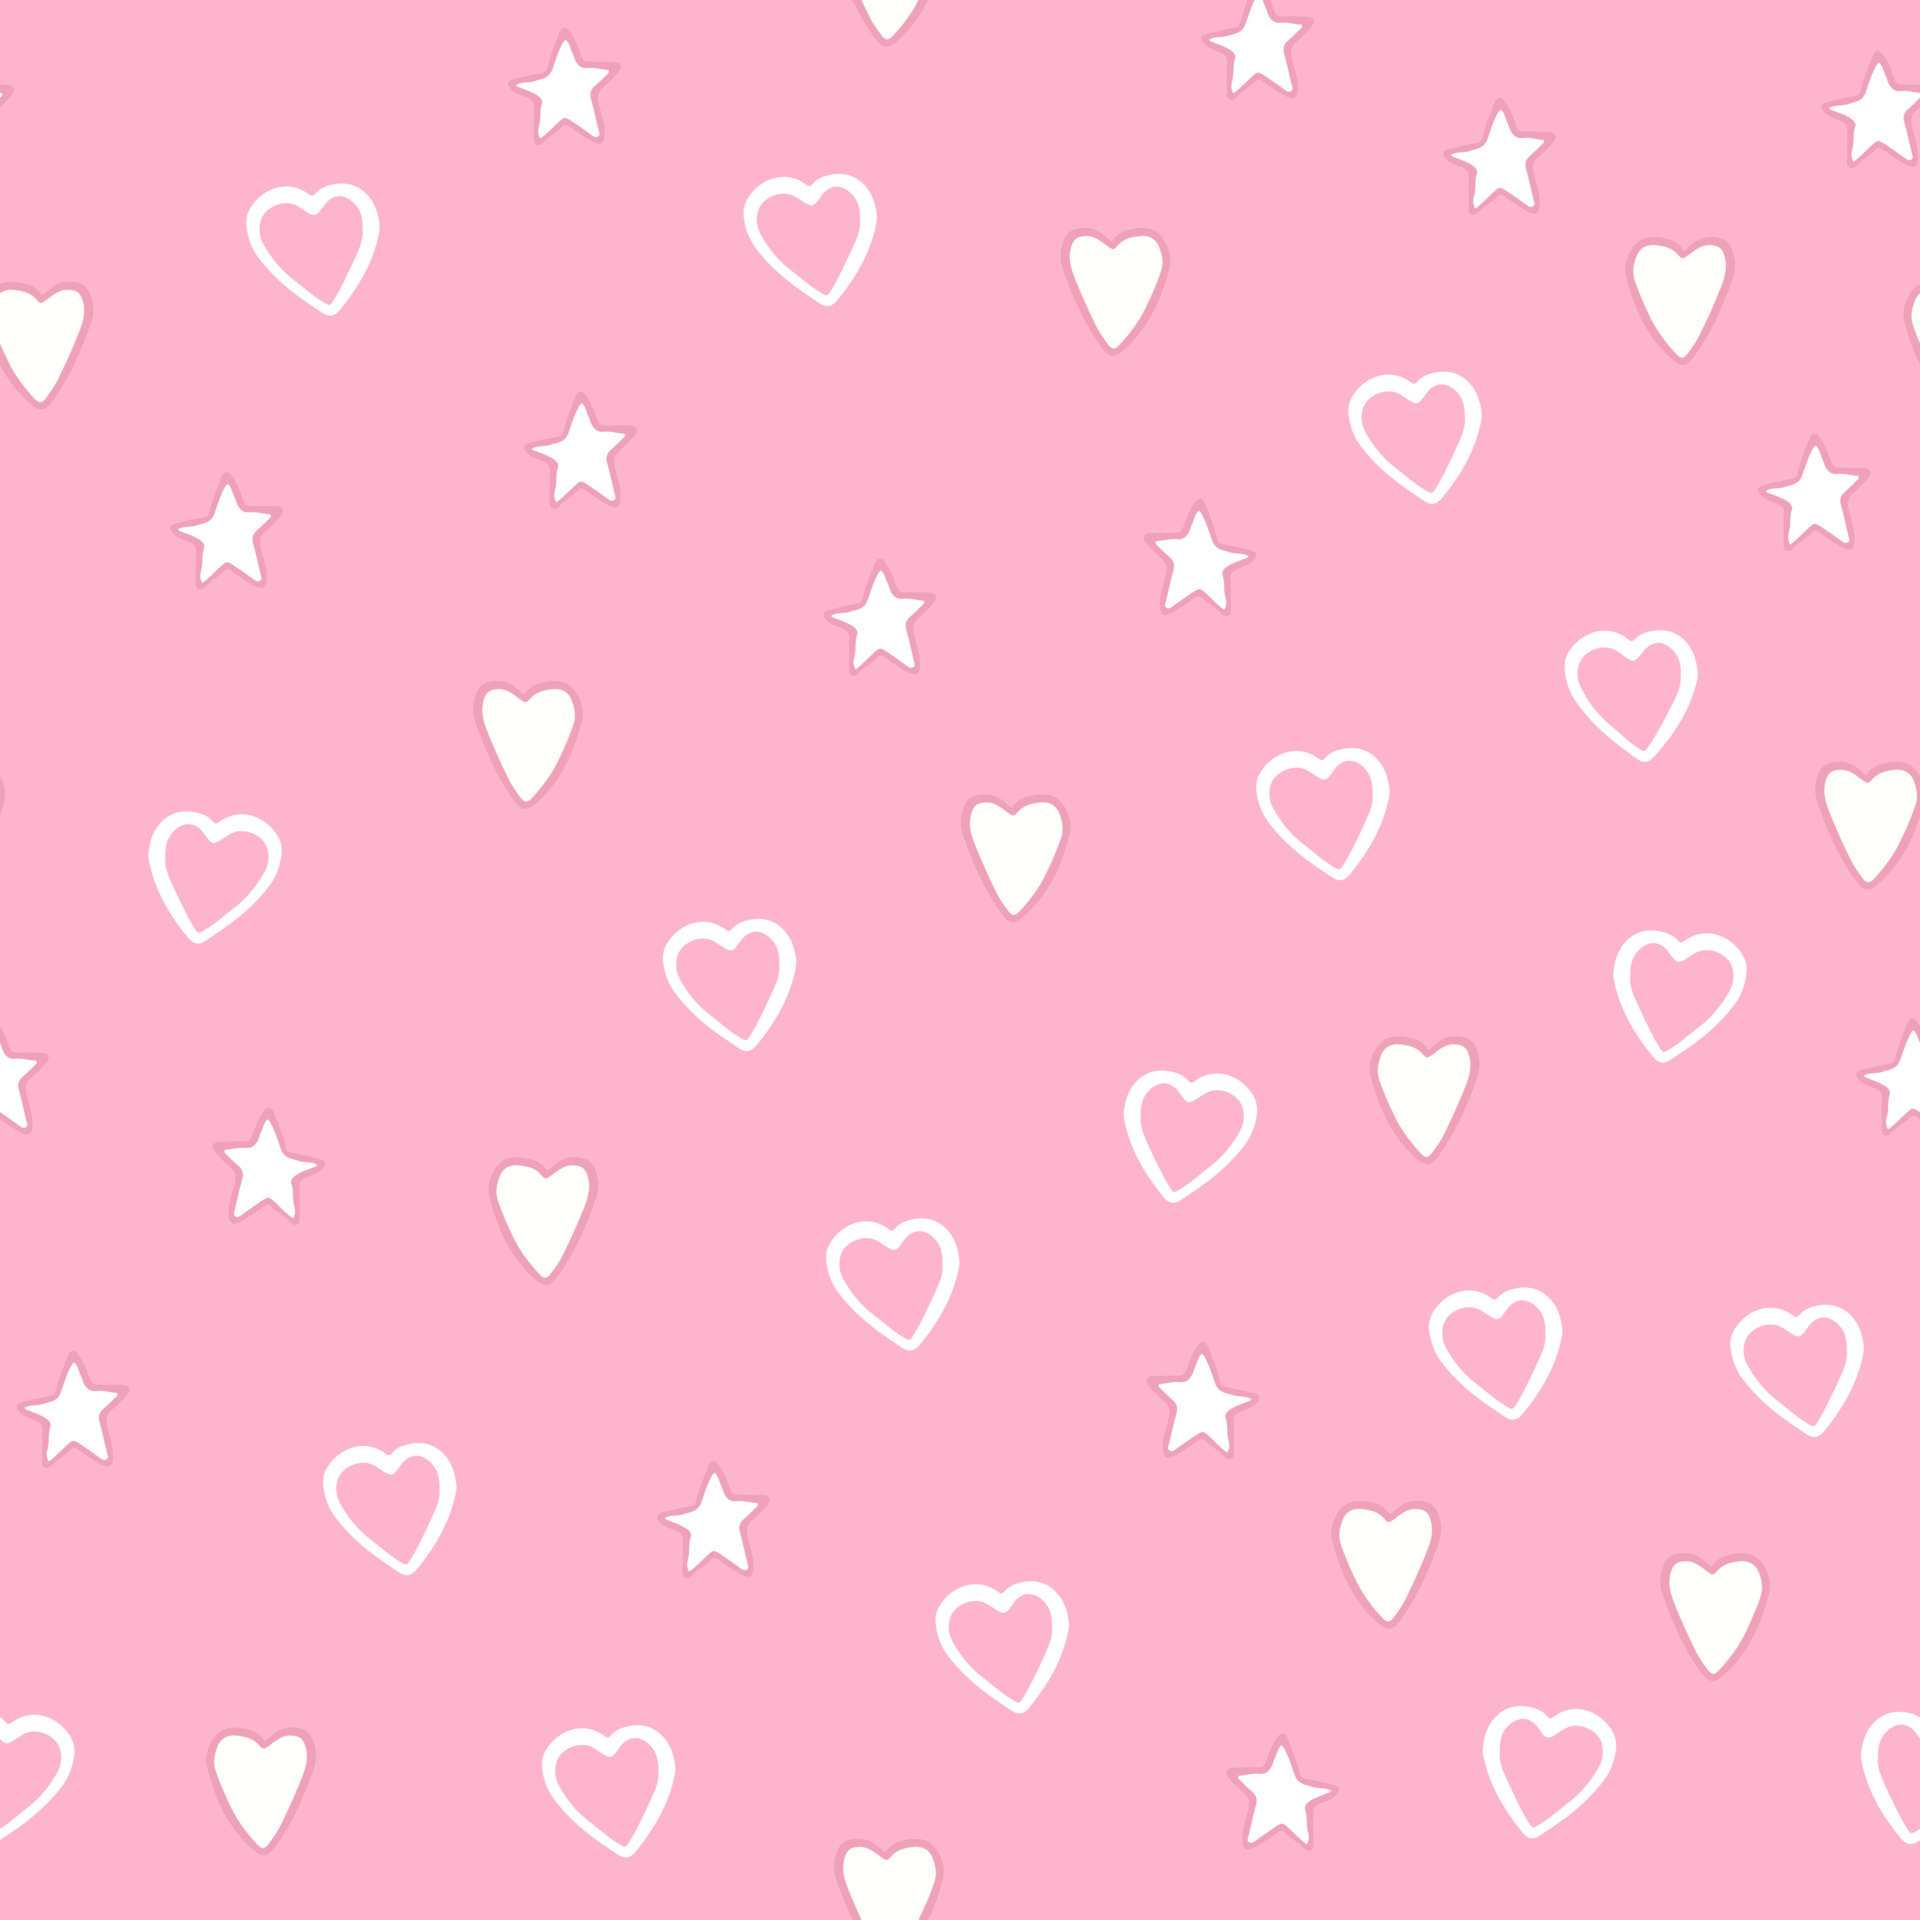 Simple hearts shapes seamless pattern on pink background. Valentines Day wallpaper. 14 february backdrop